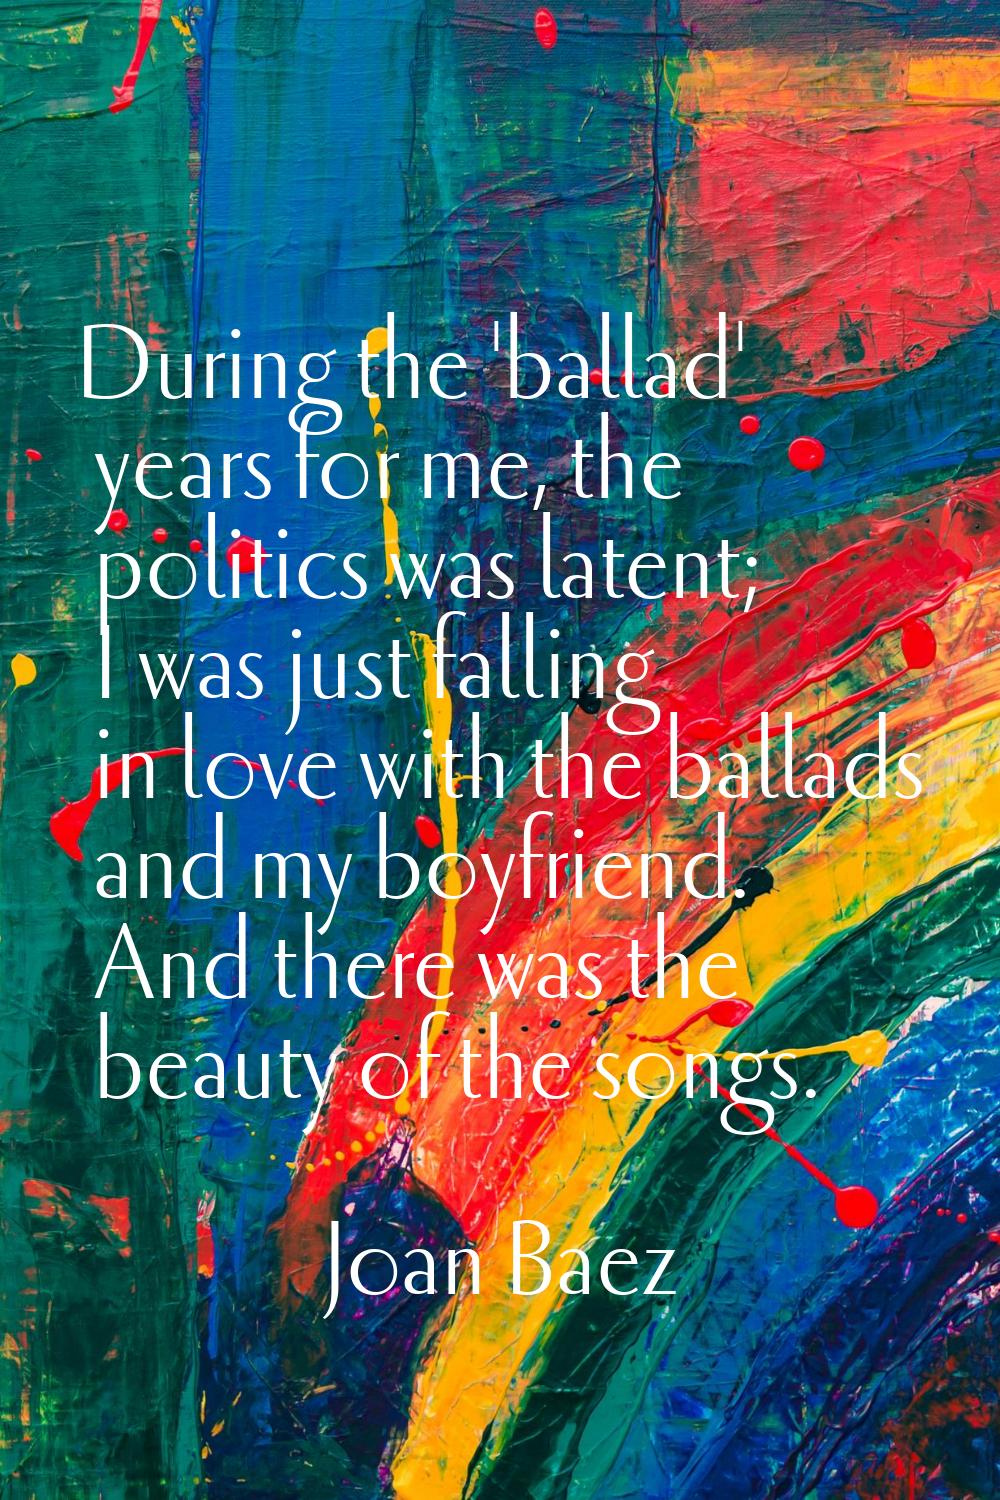 During the 'ballad' years for me, the politics was latent; I was just falling in love with the ball